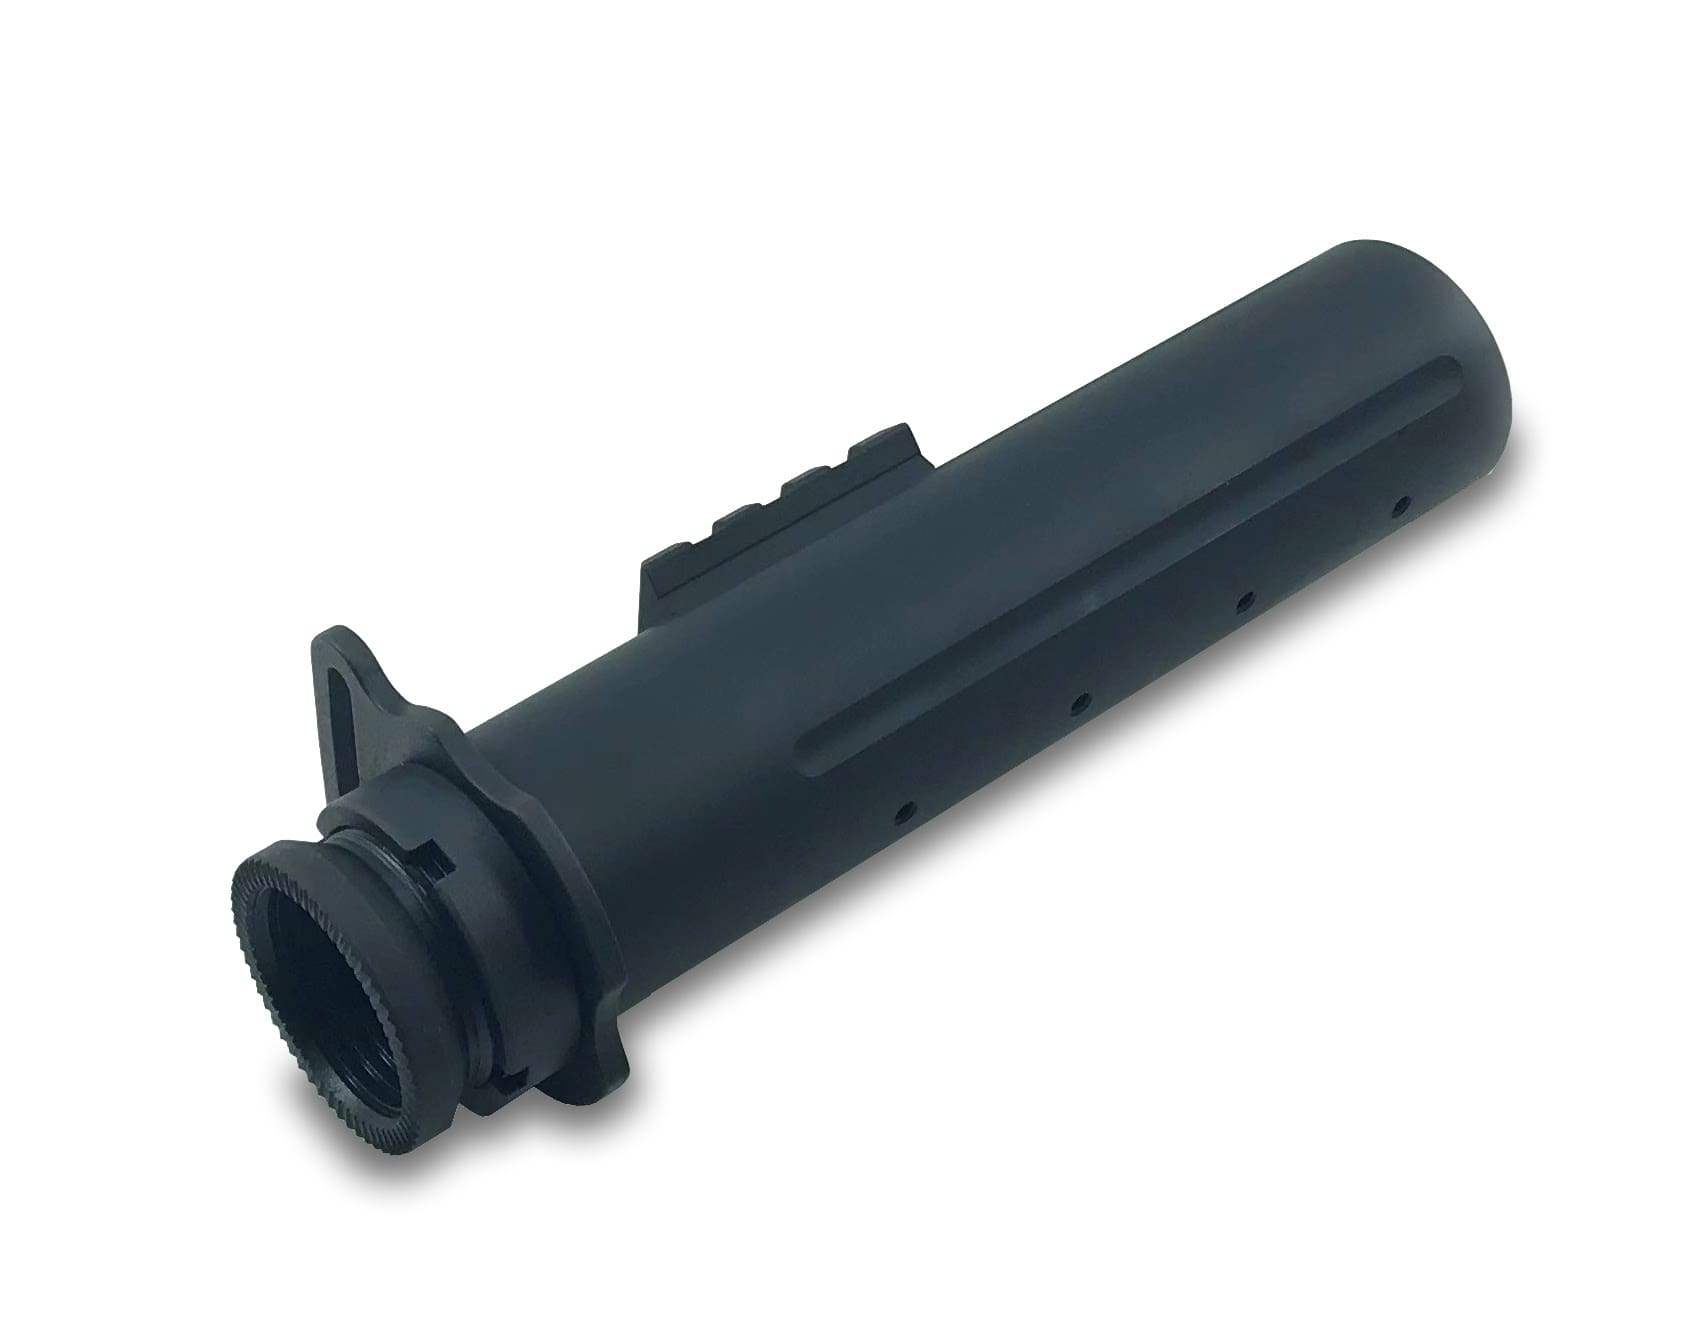 Choate night manager remington mossberg magazine extension